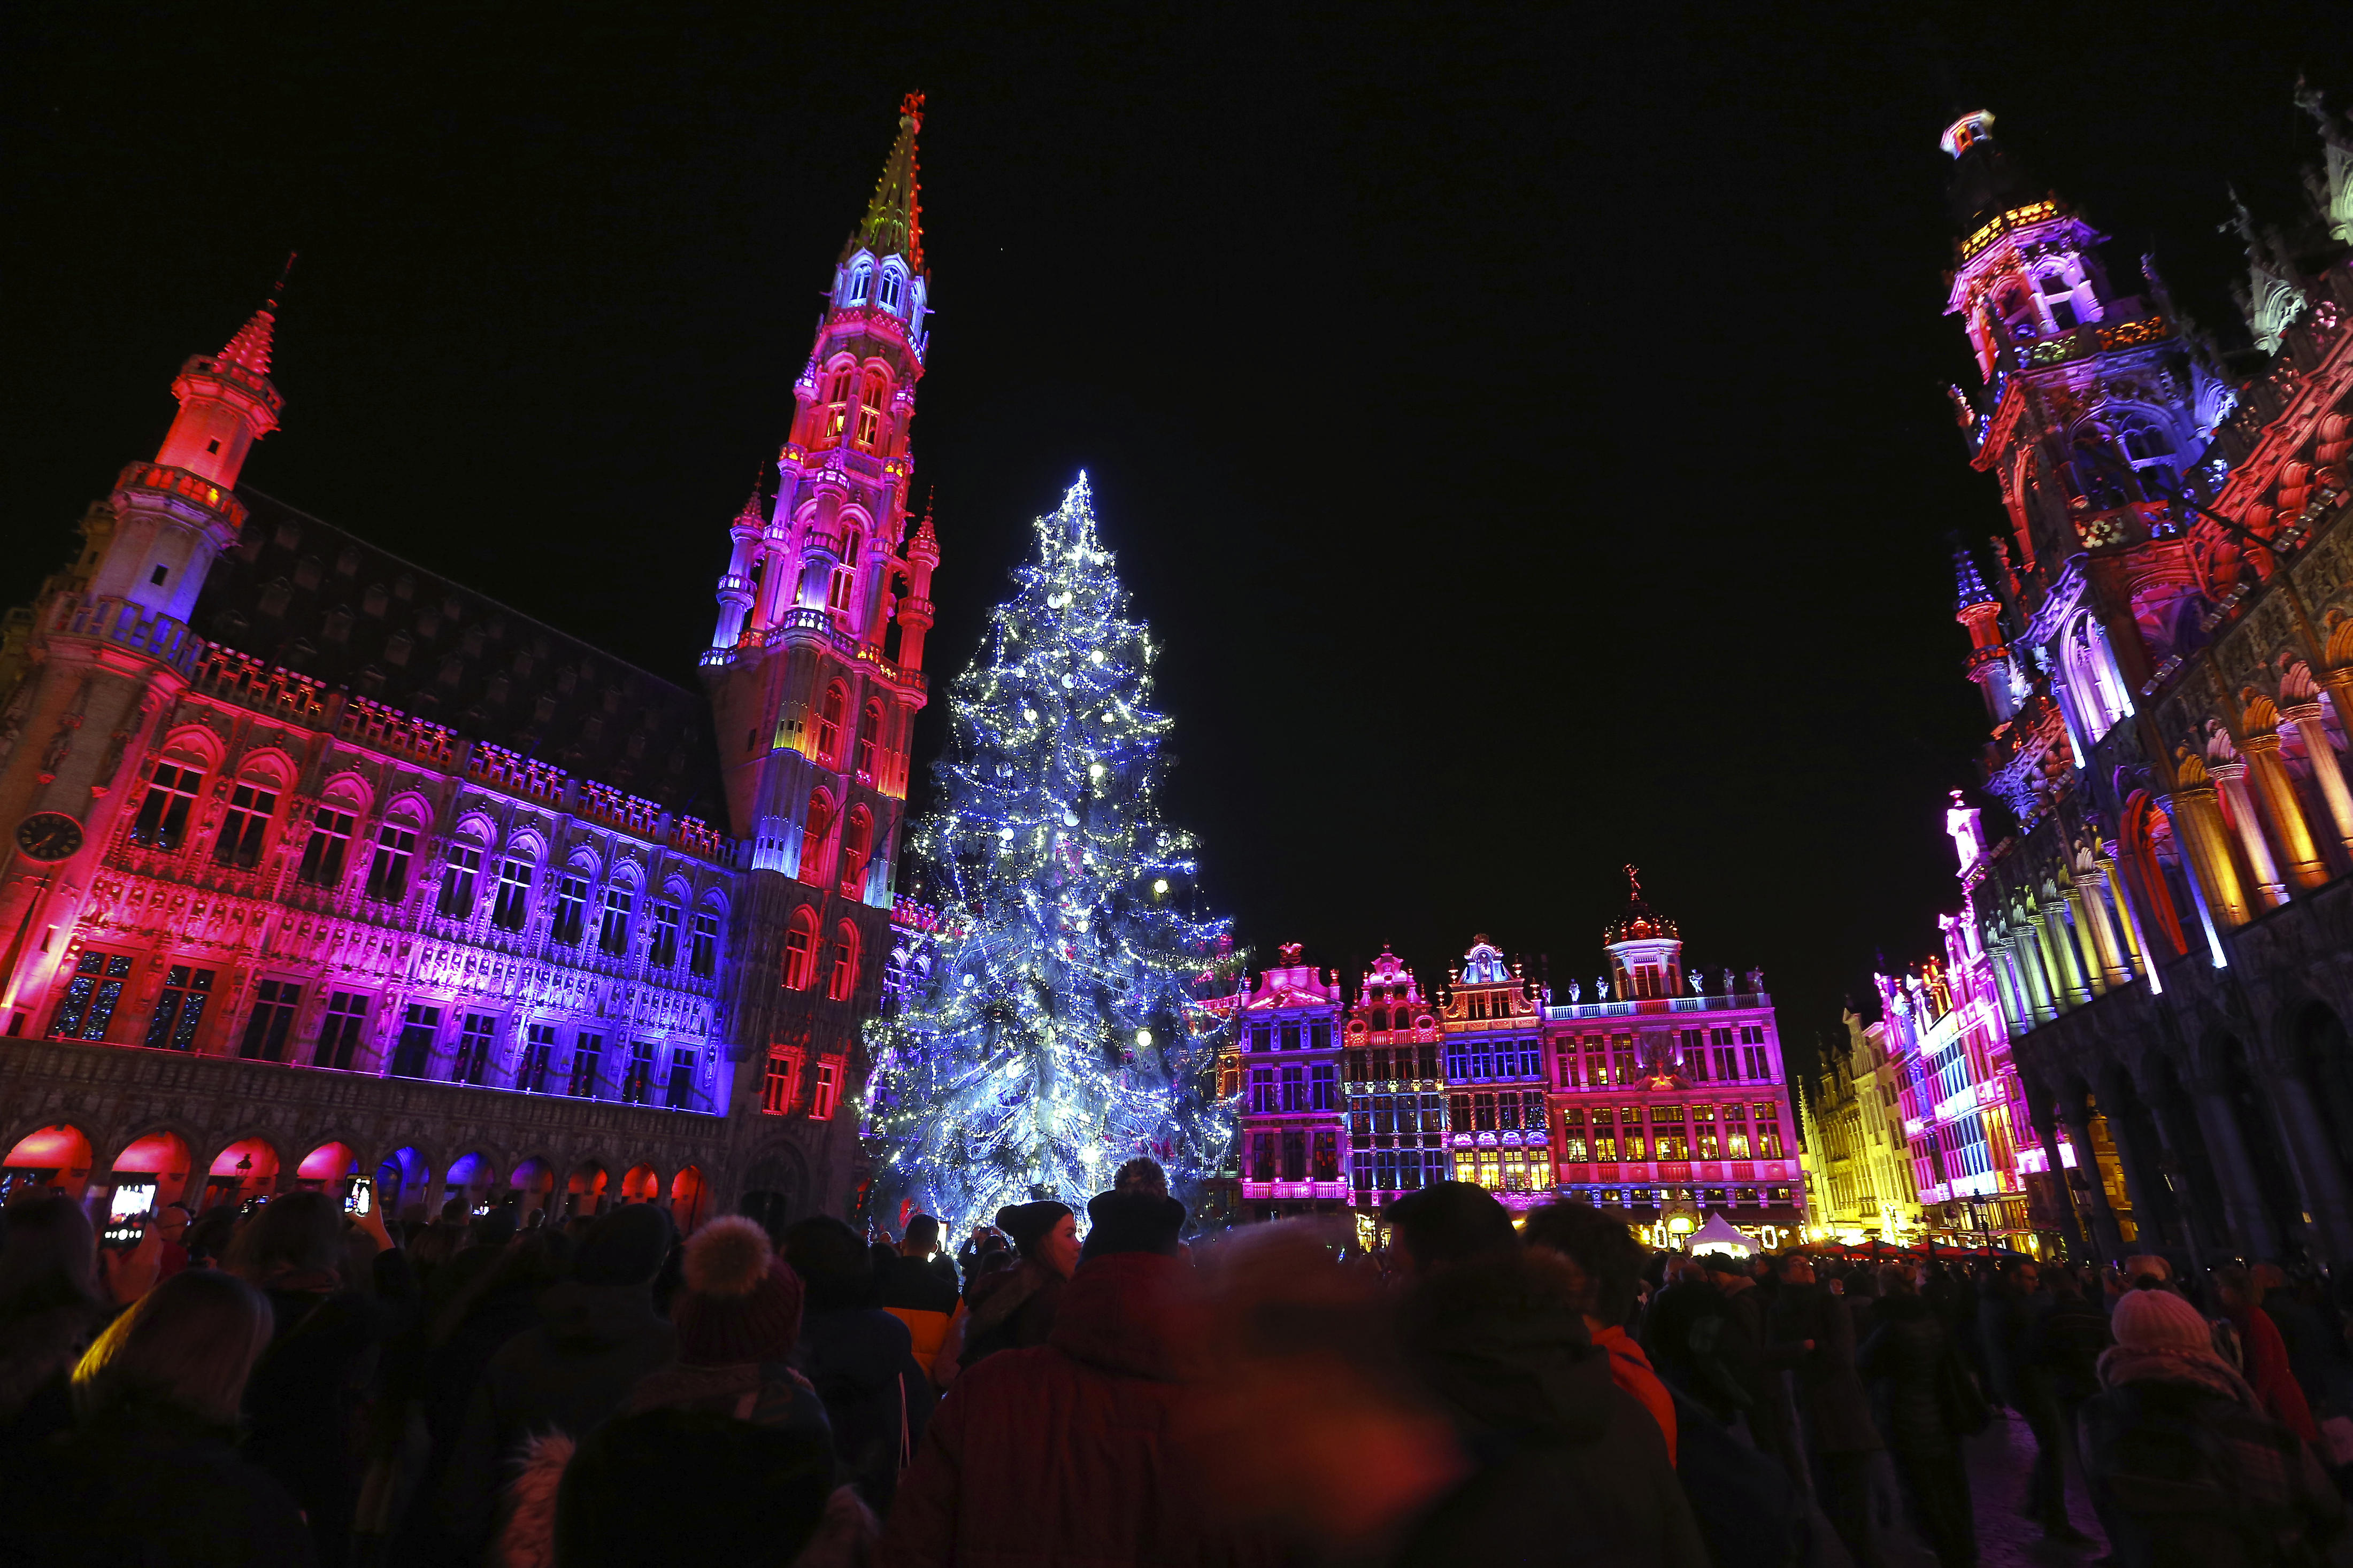 Grand-Place to arrive Thursday | The Bulletin